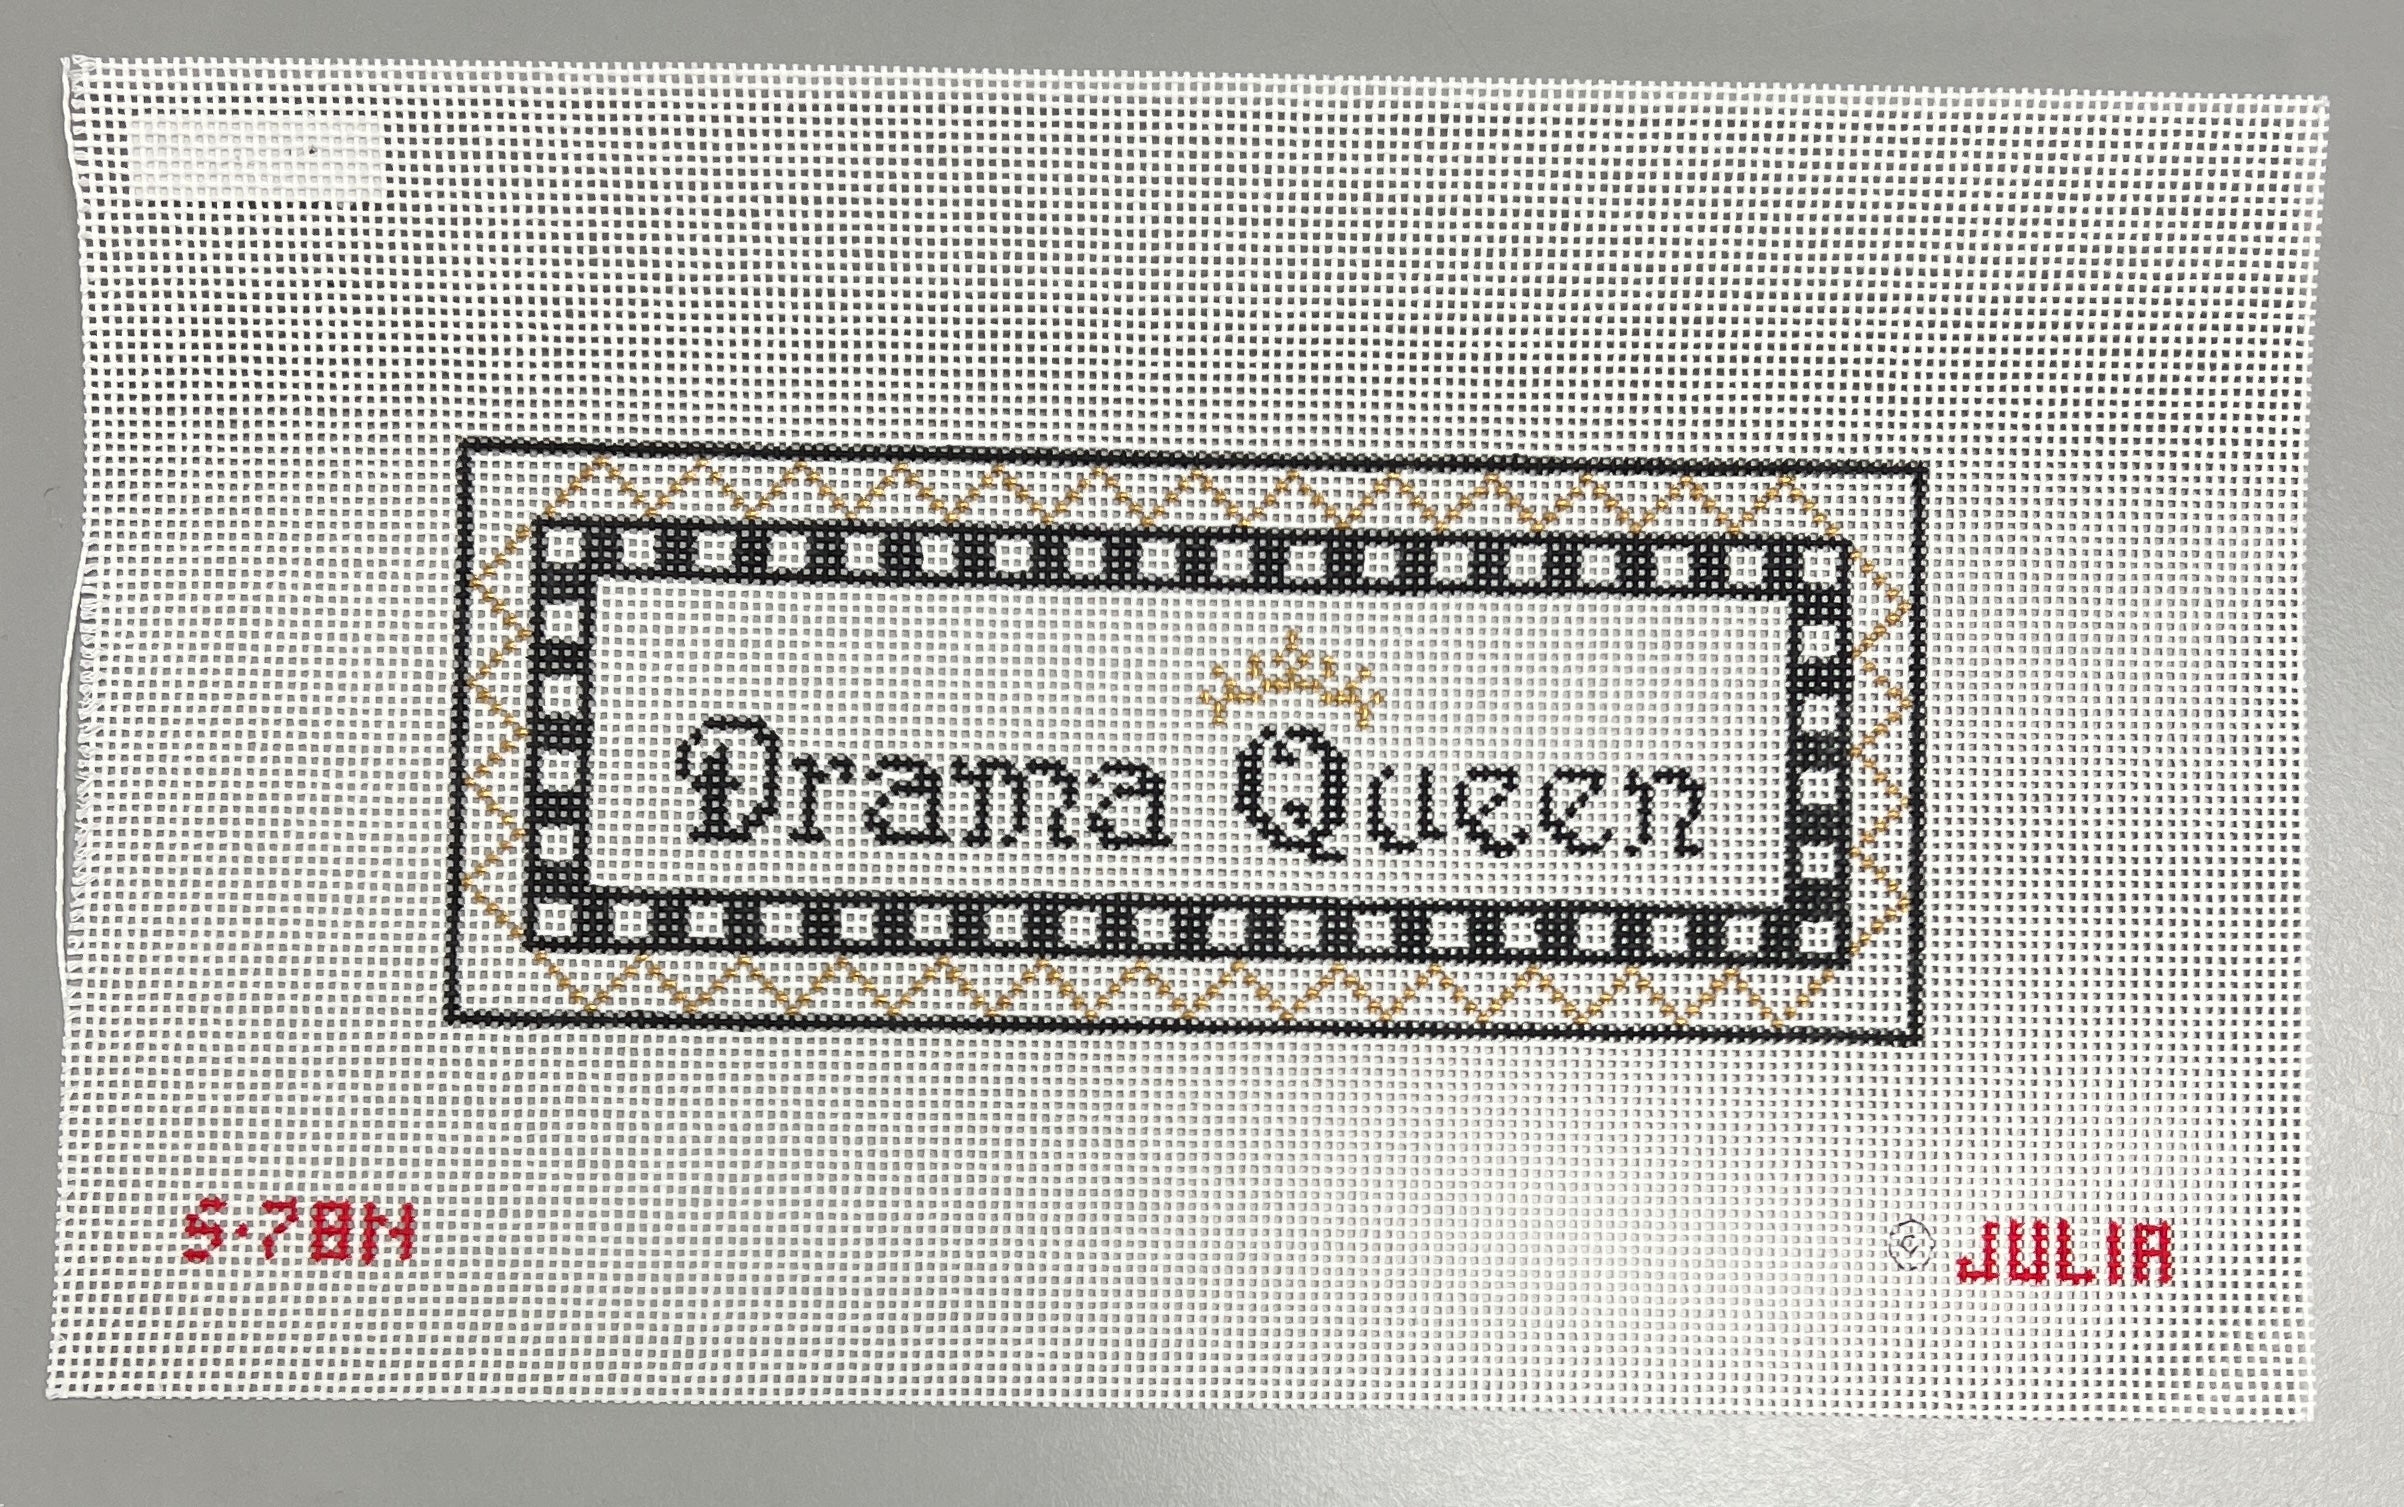 S78N - Drama Queen